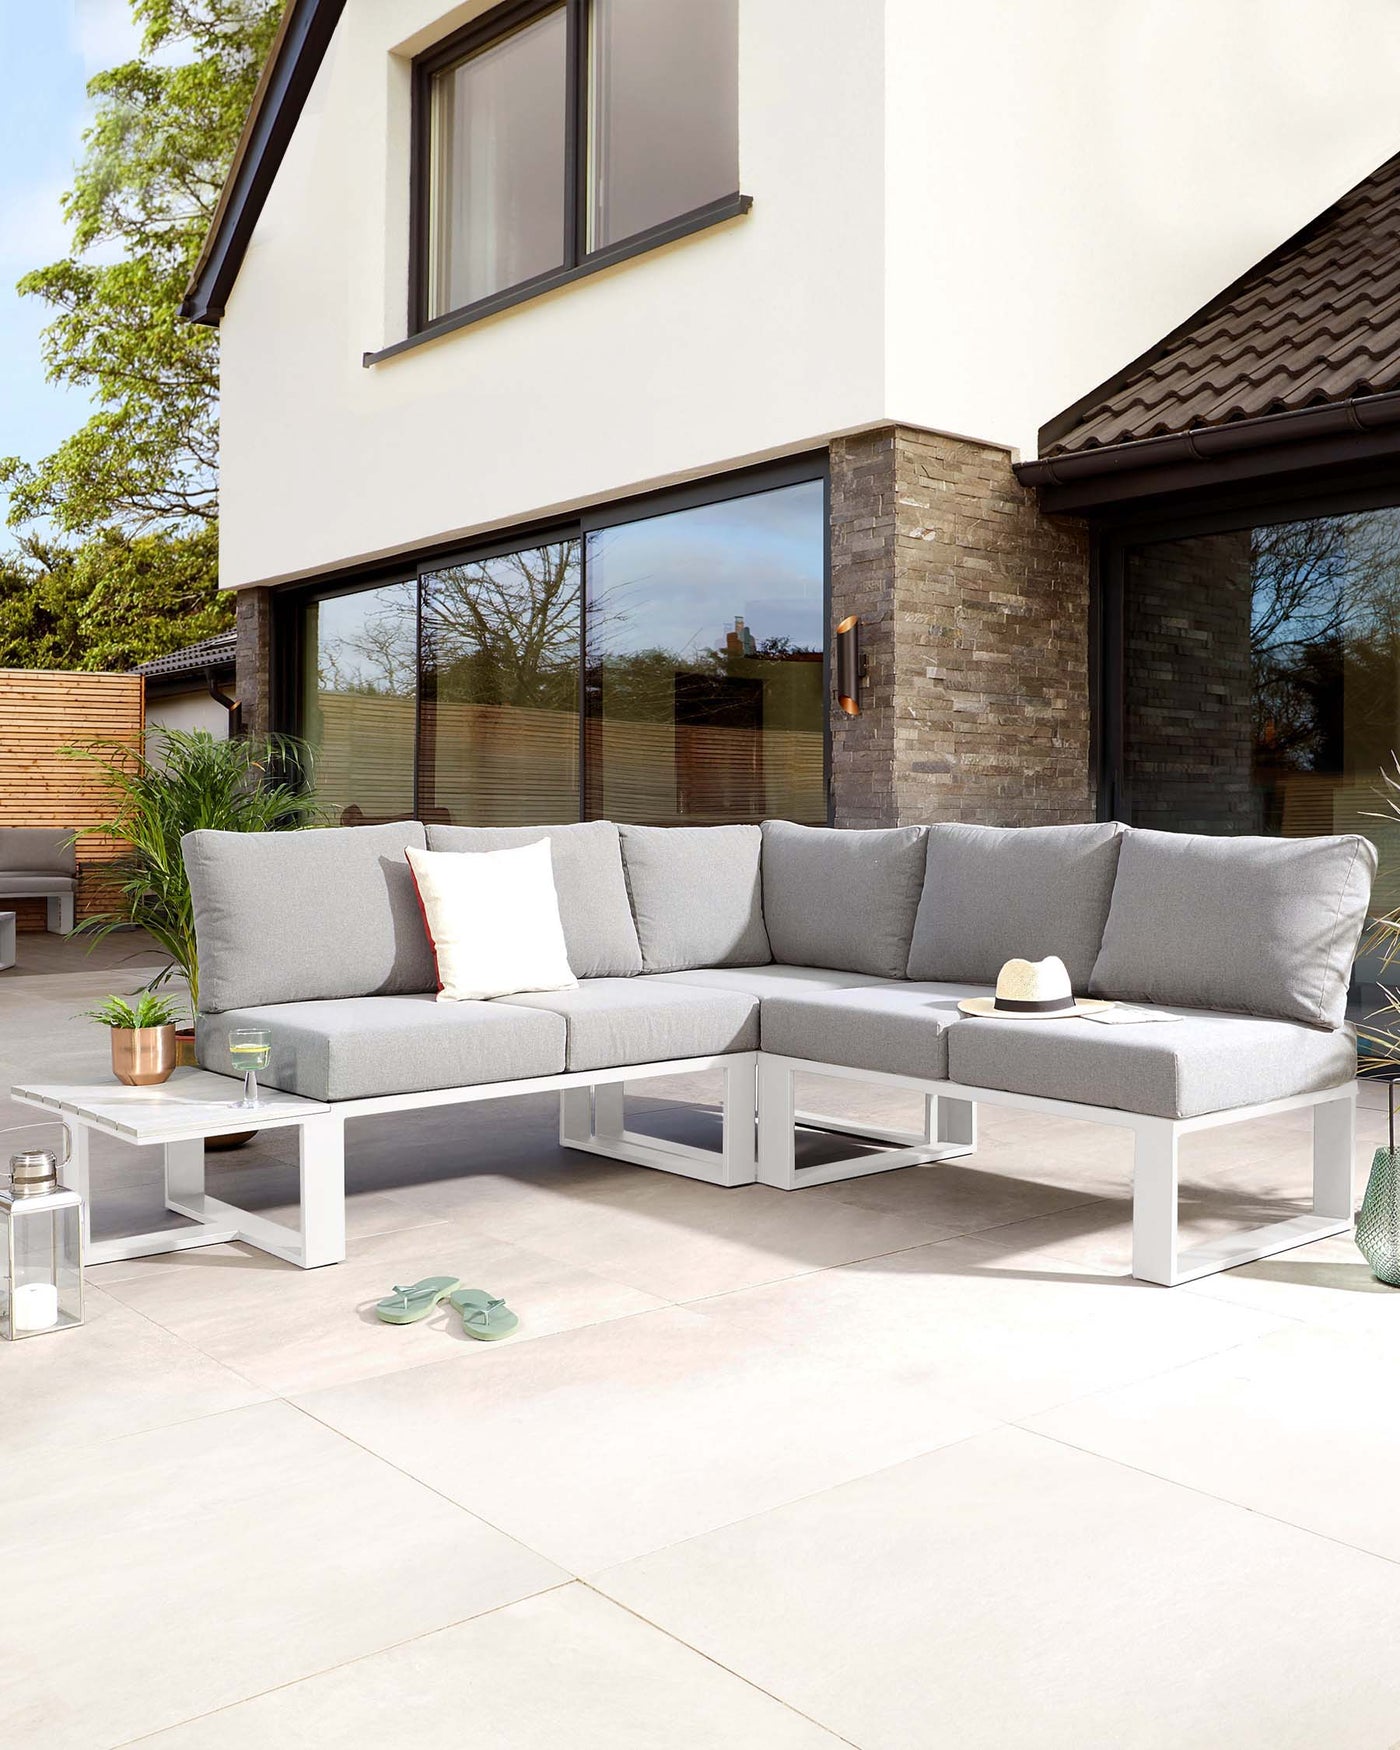 Modern outdoor sectional sofa with light grey cushions on a white aluminium frame, paired with a matching white aluminium coffee table, displayed on a patio setting.